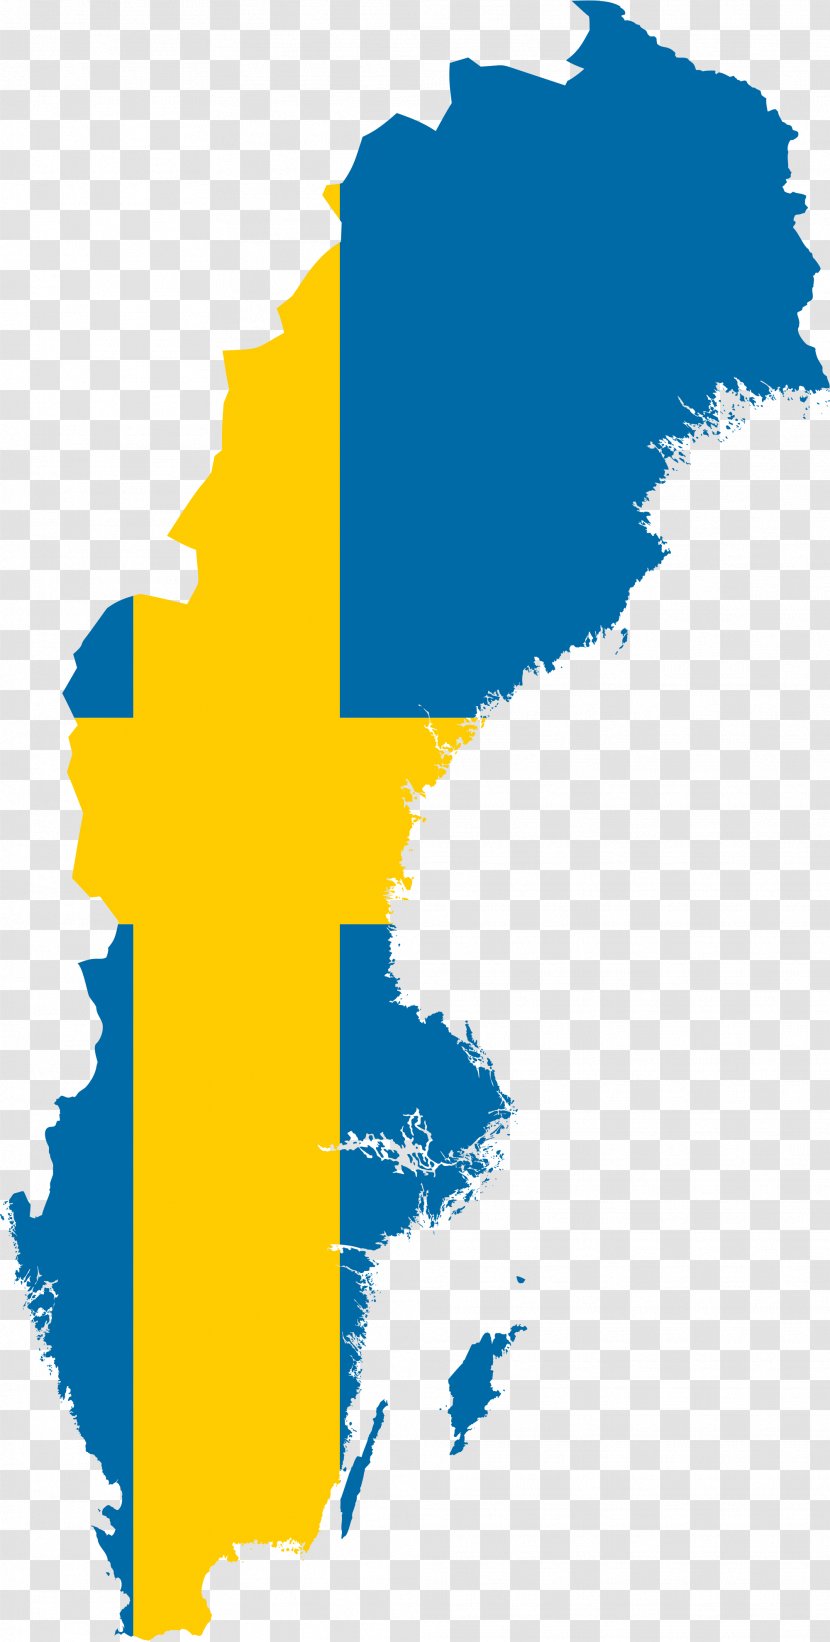 Flag Of Sweden Map Union Between And Norway - File Negara - Country Transparent PNG